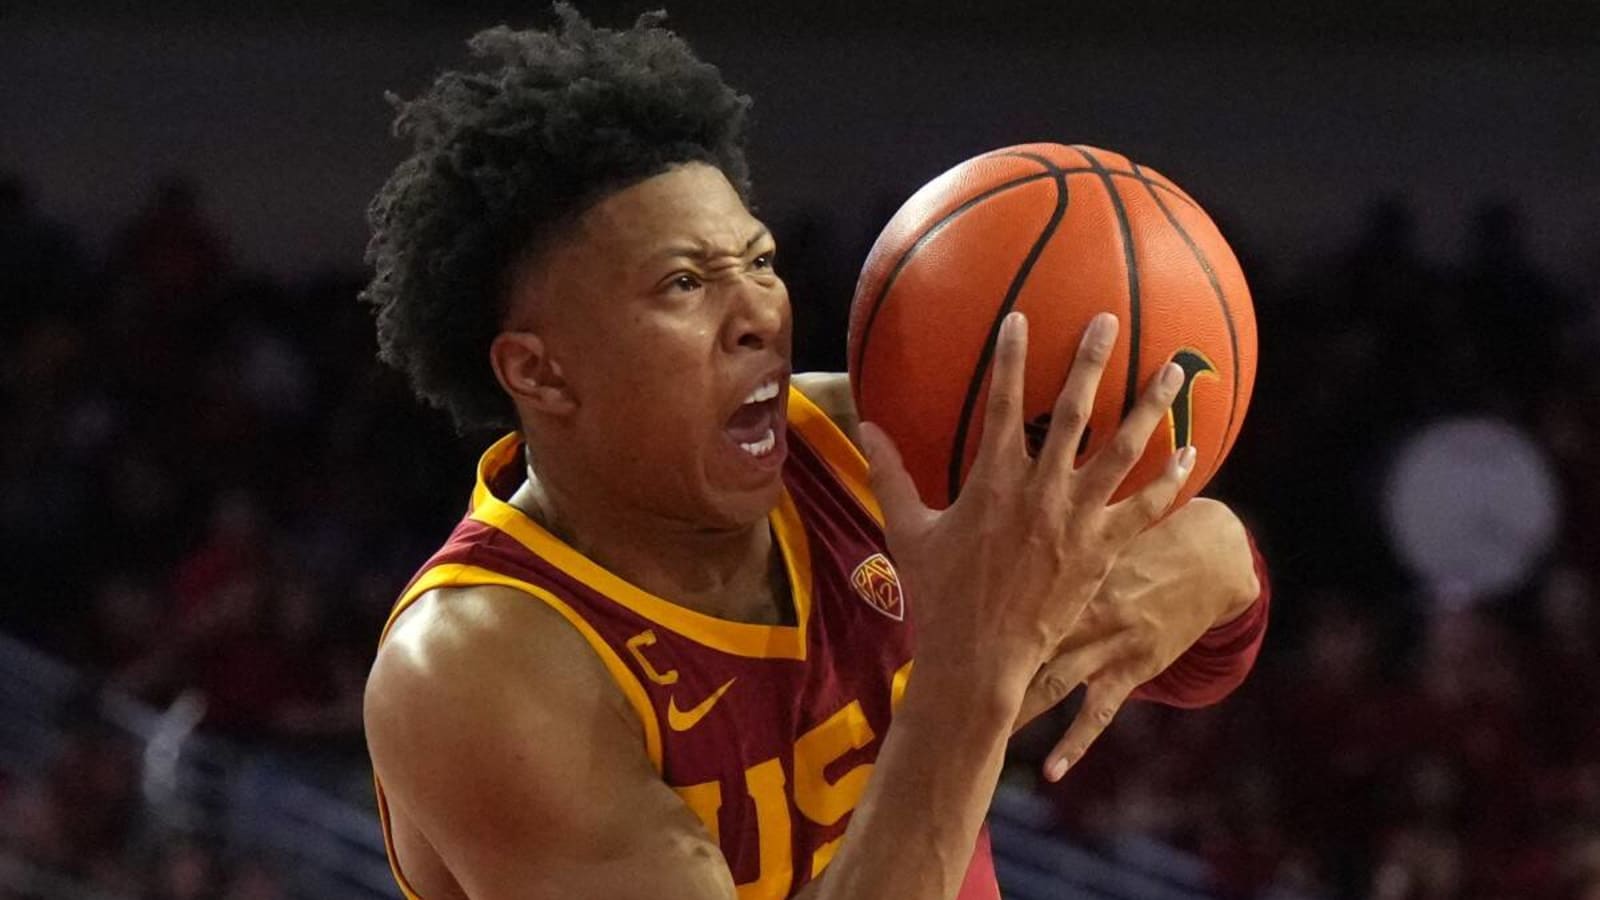 USC Basketball: Fifth-Year Guard Leads Trojans to Upset Victory Over UCLA